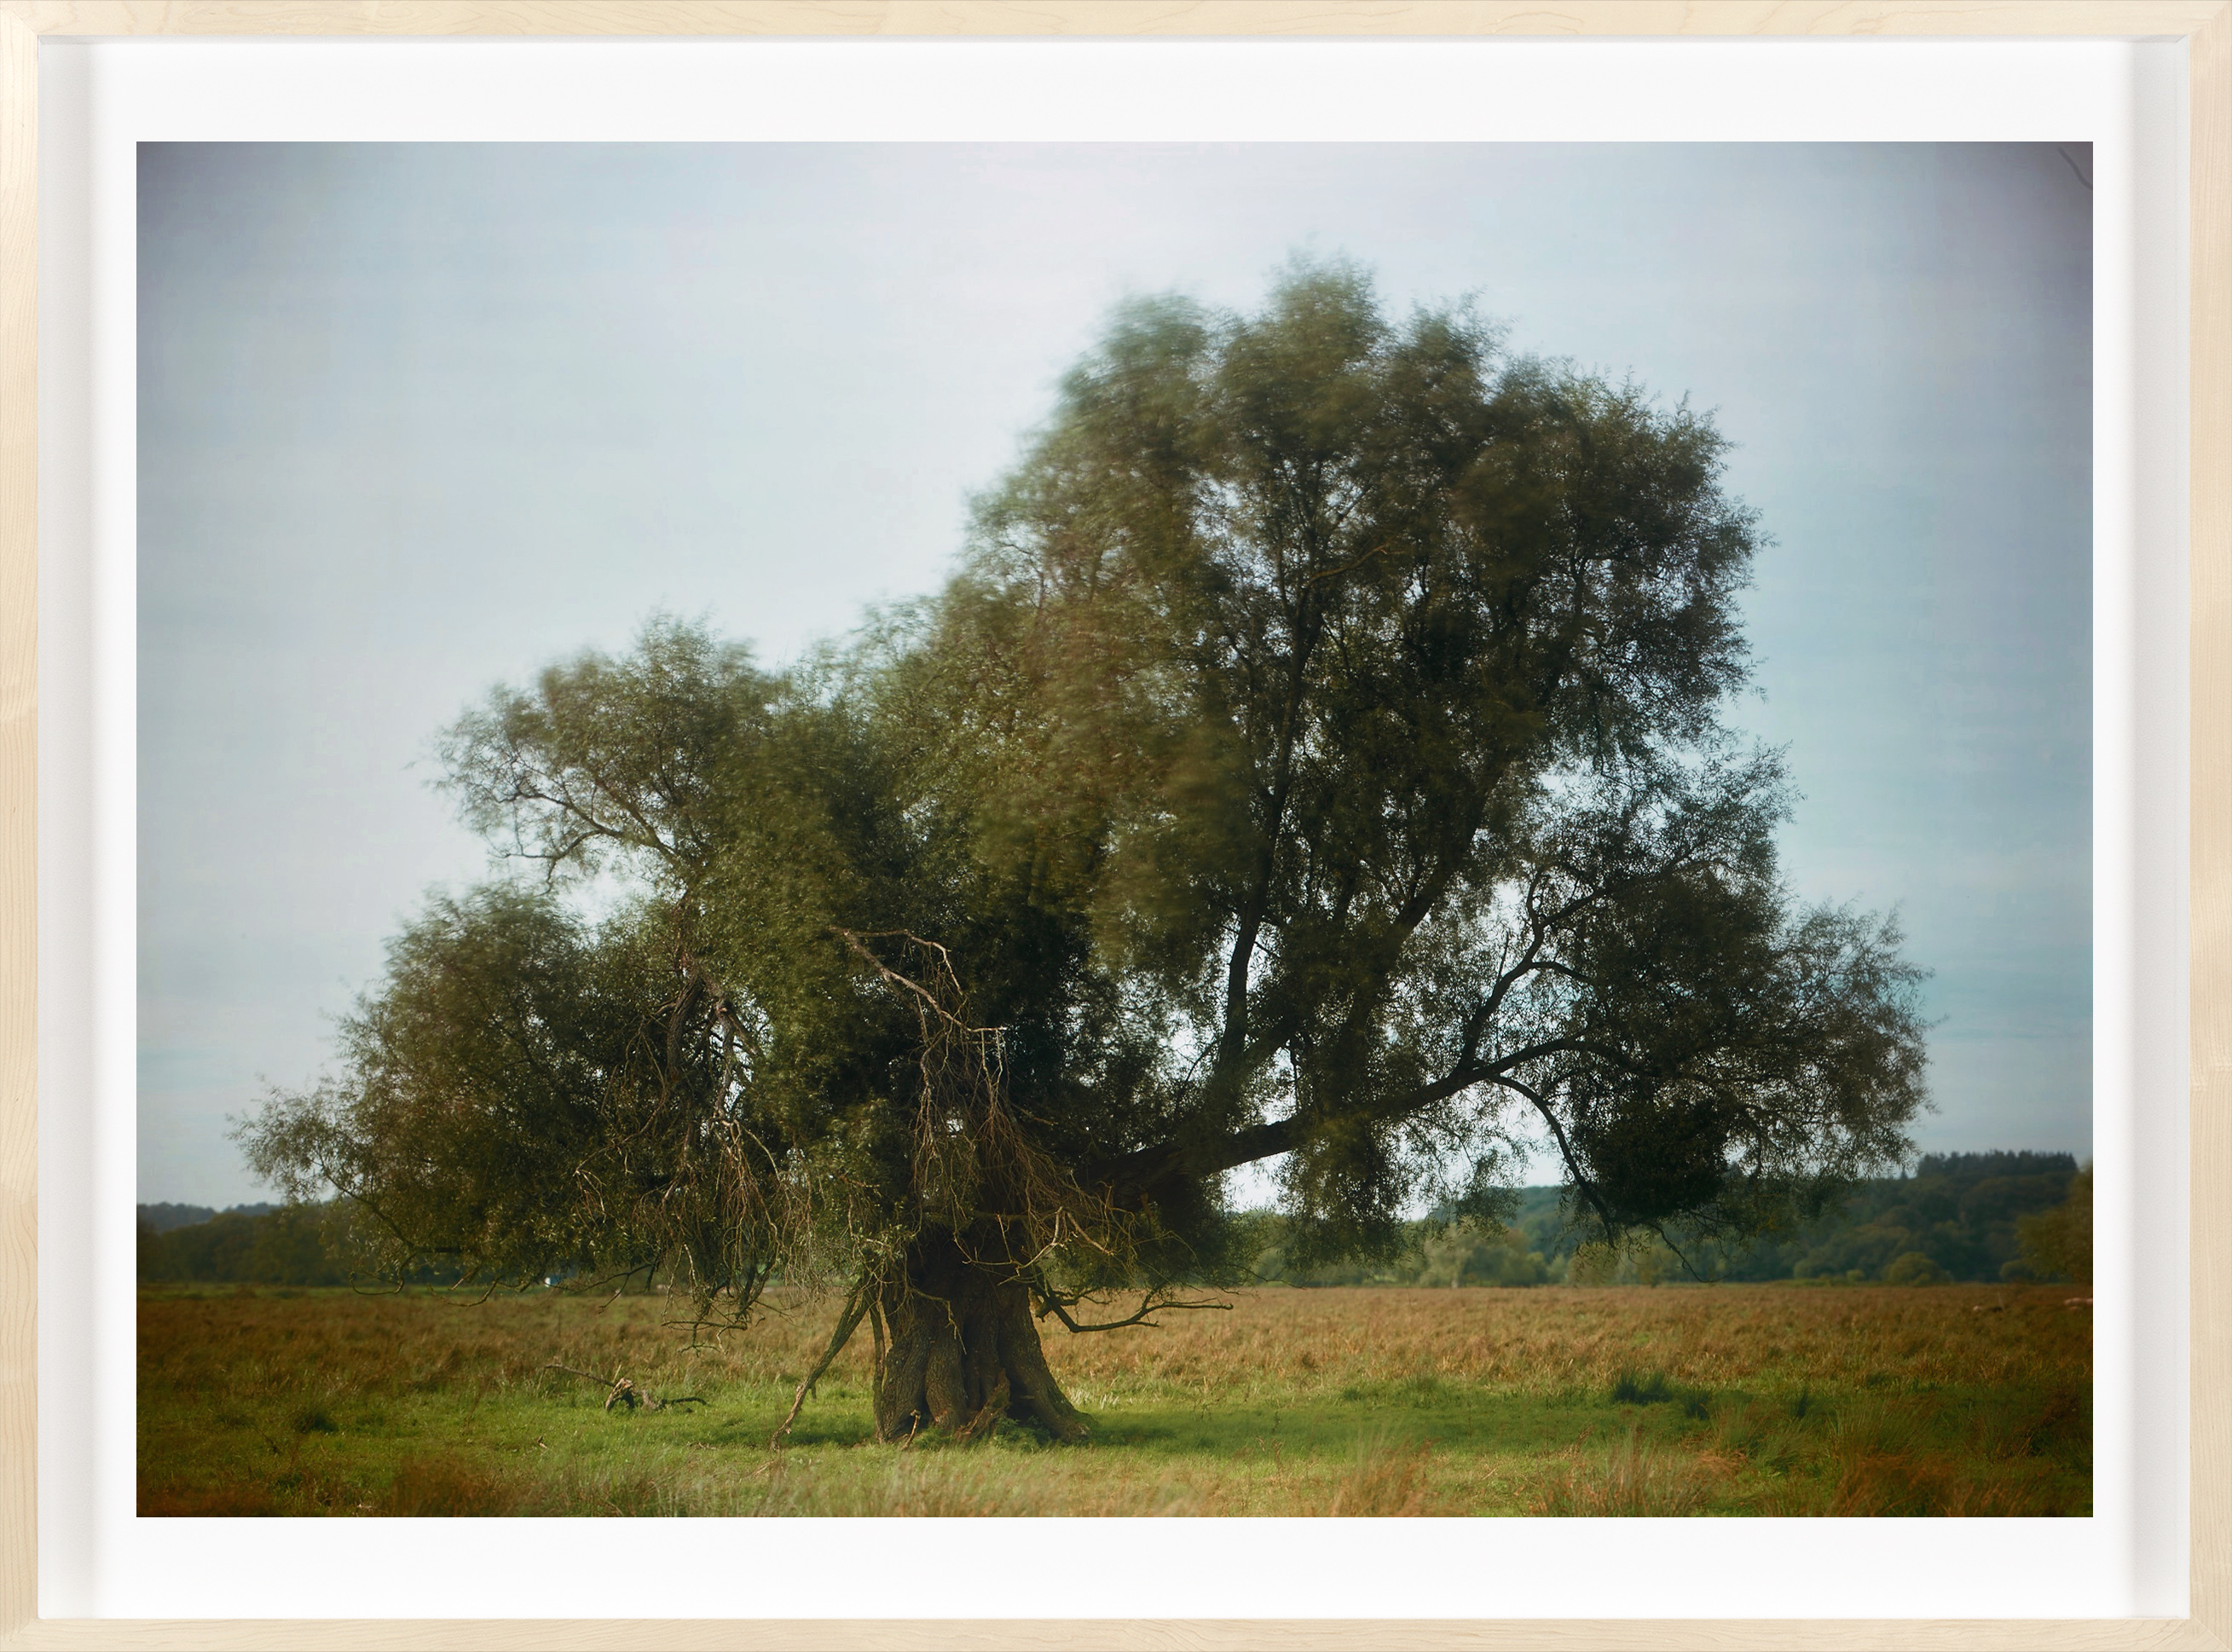 Color photograph of a large willow tree in the center of a grassy field framed in a bleach wood frame